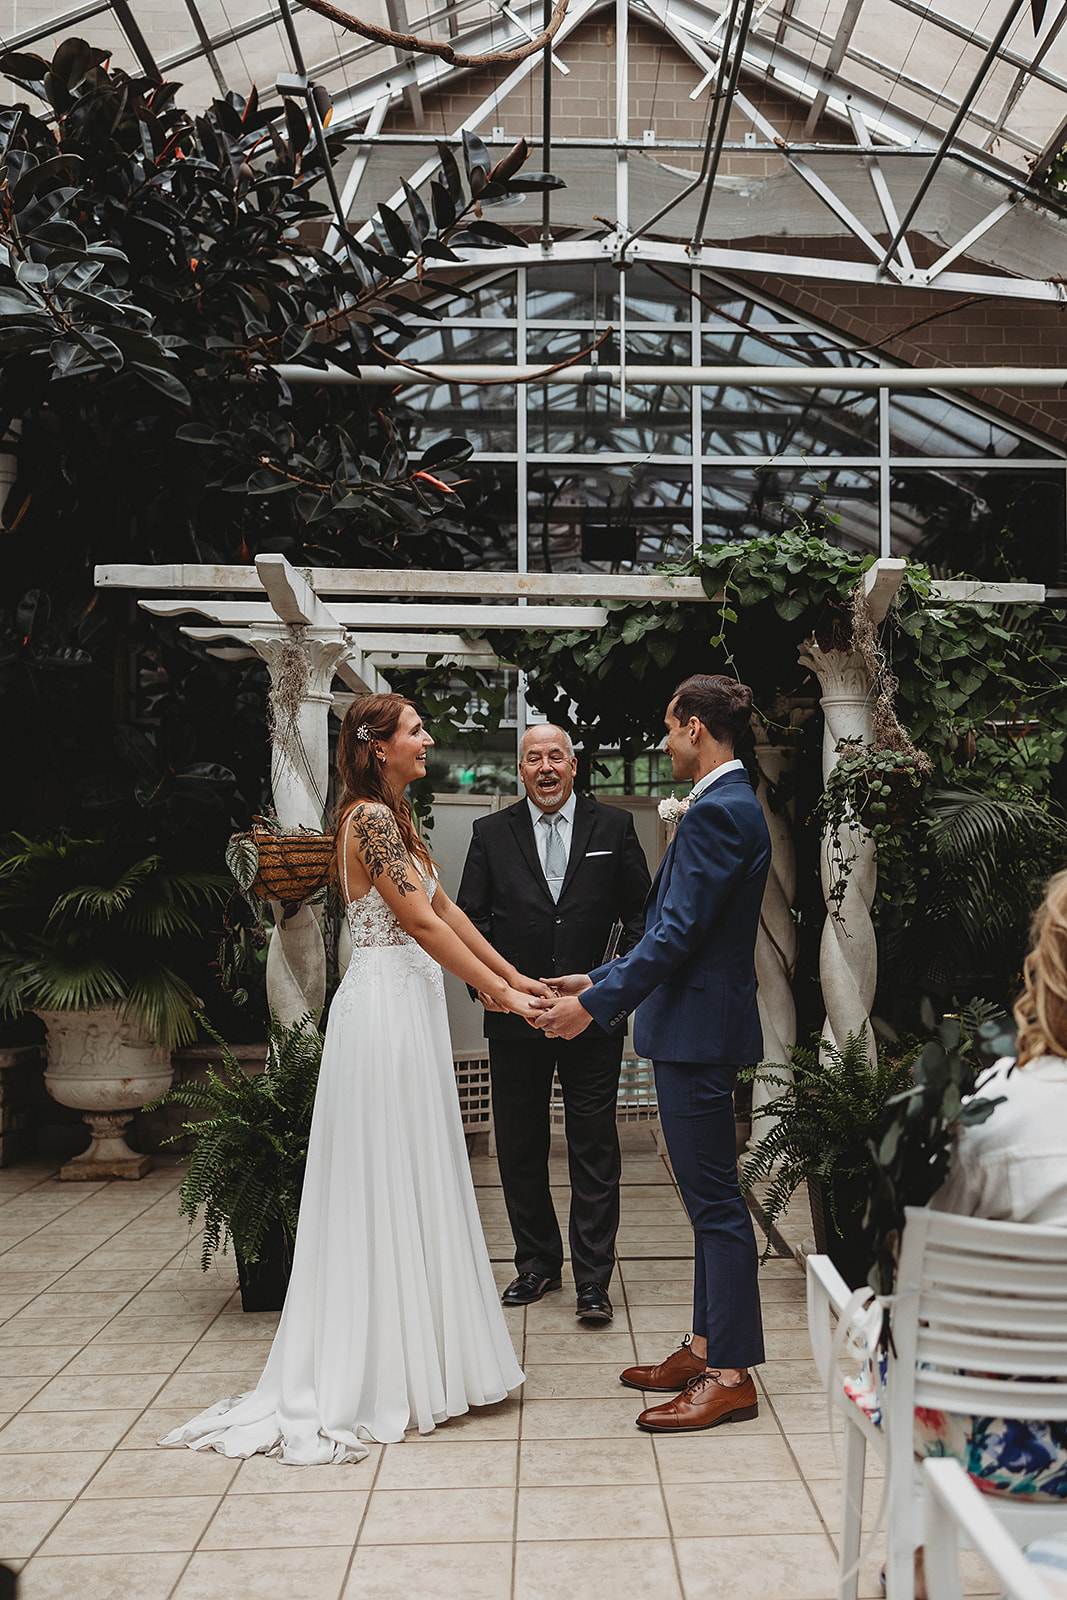 A couple who who married at Grand Rapids, Michigan say their vows in the Victorian Room of Frederik Meijer Gardens